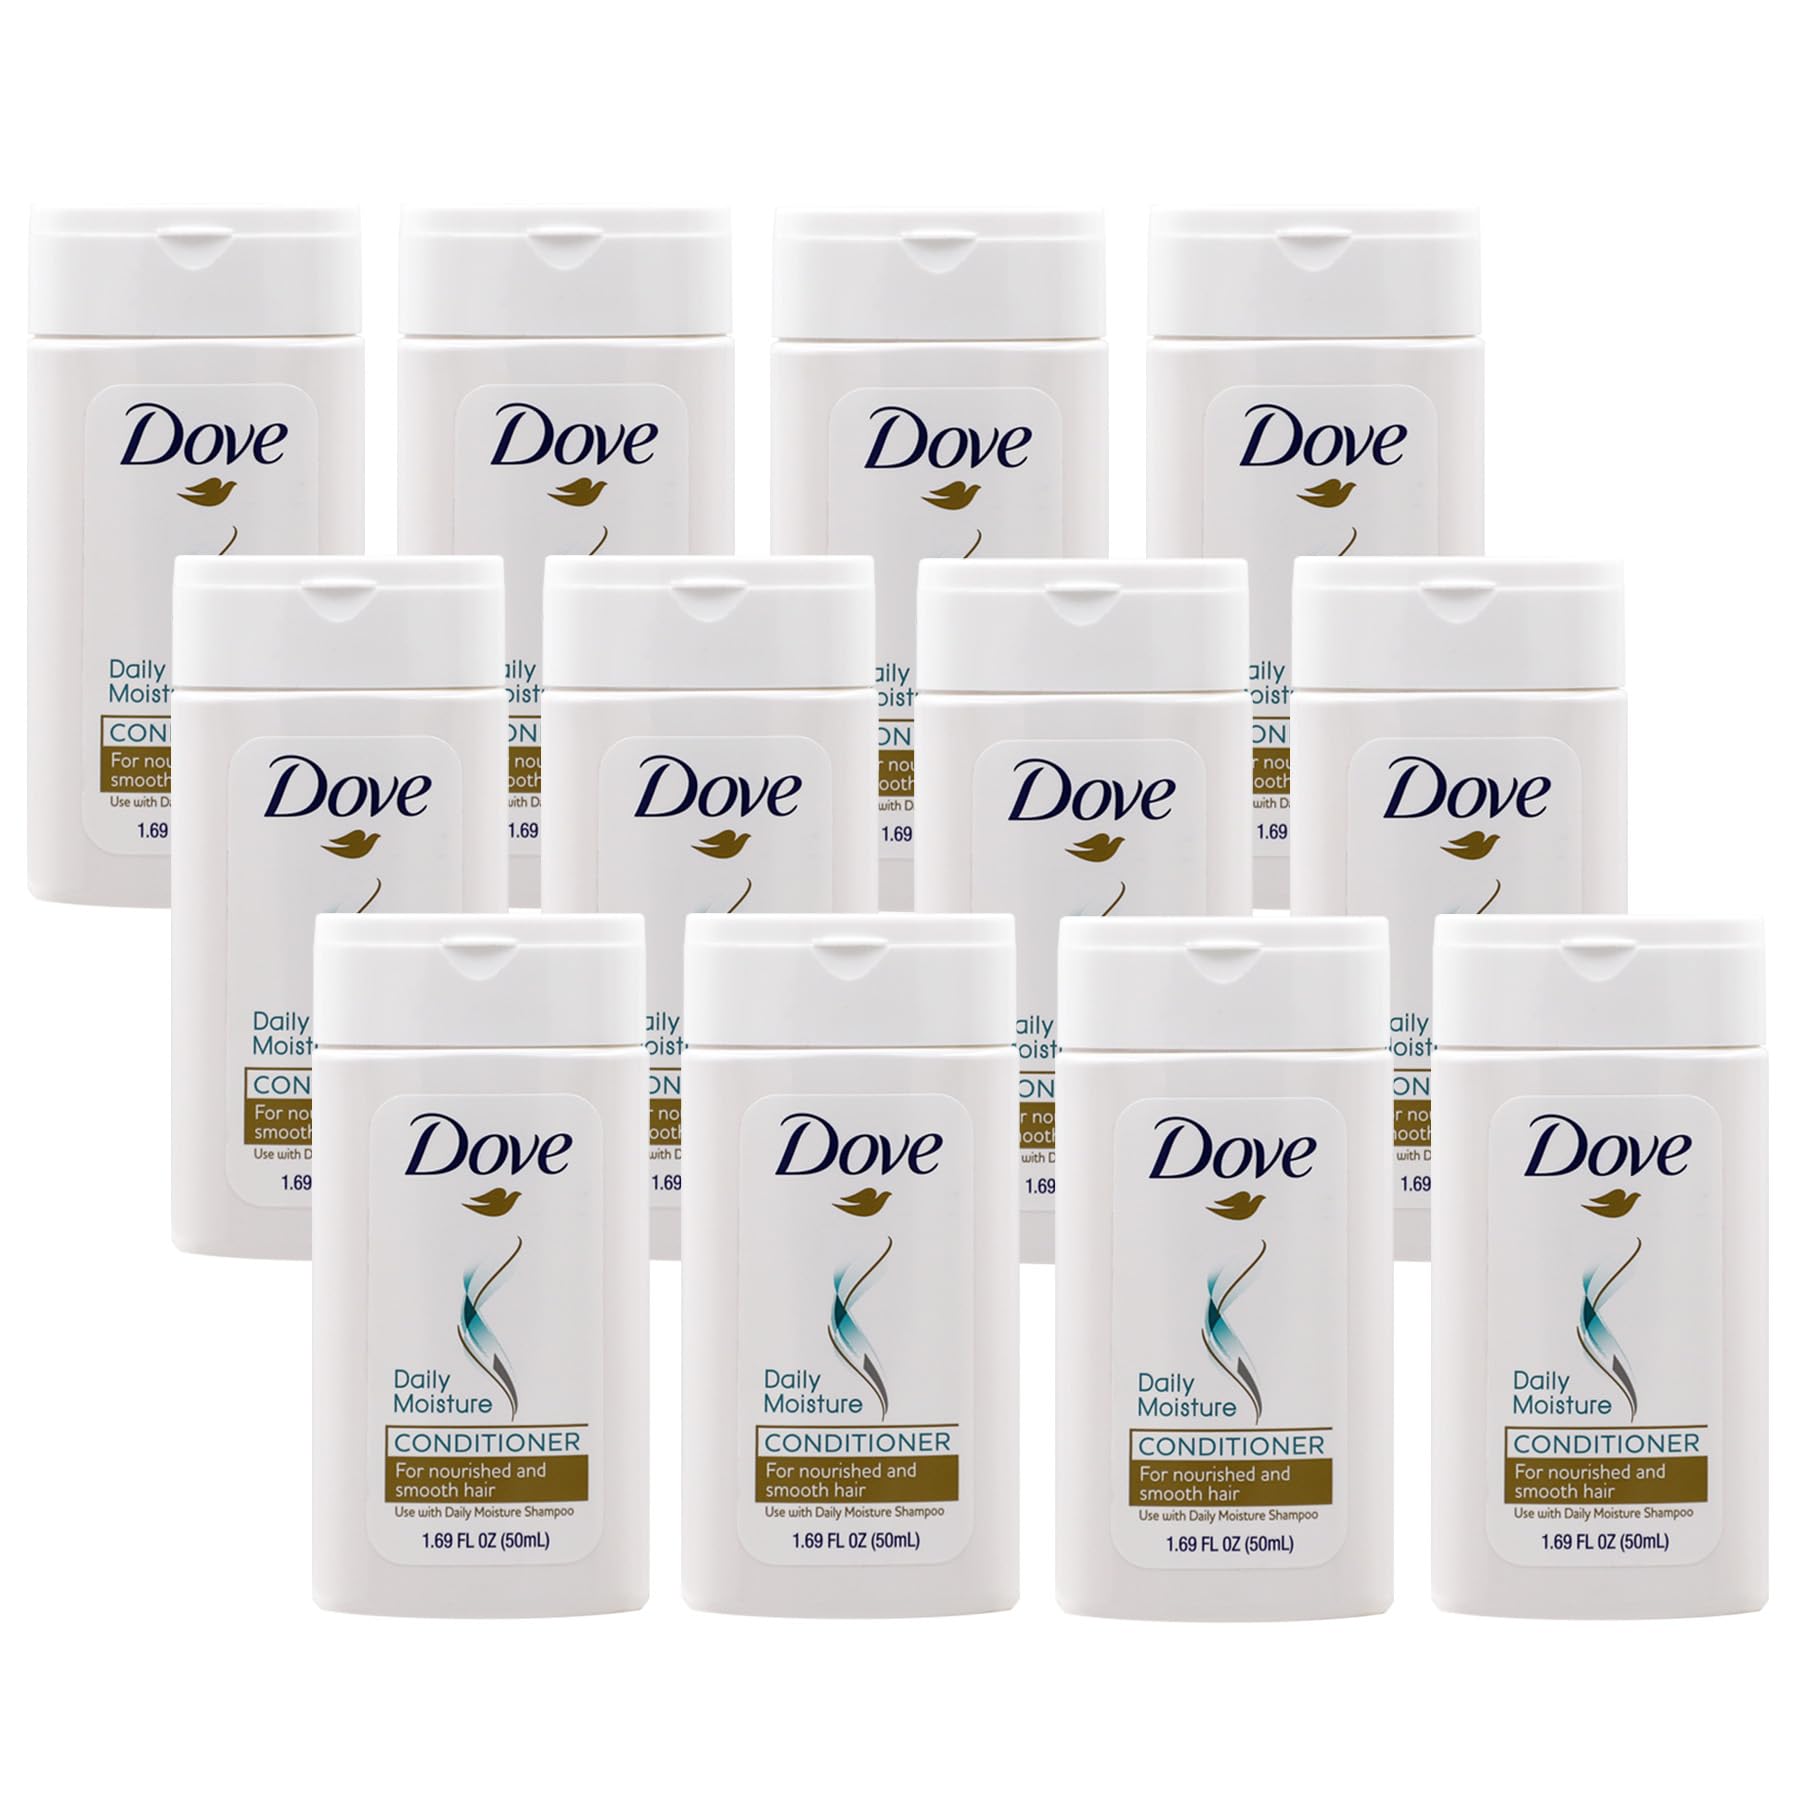 Dove Conditioner, Daily Moisture, Nourishing System for Smooth Hair, 12-Pack, 1.7 FL Oz Each, 12 Bottles